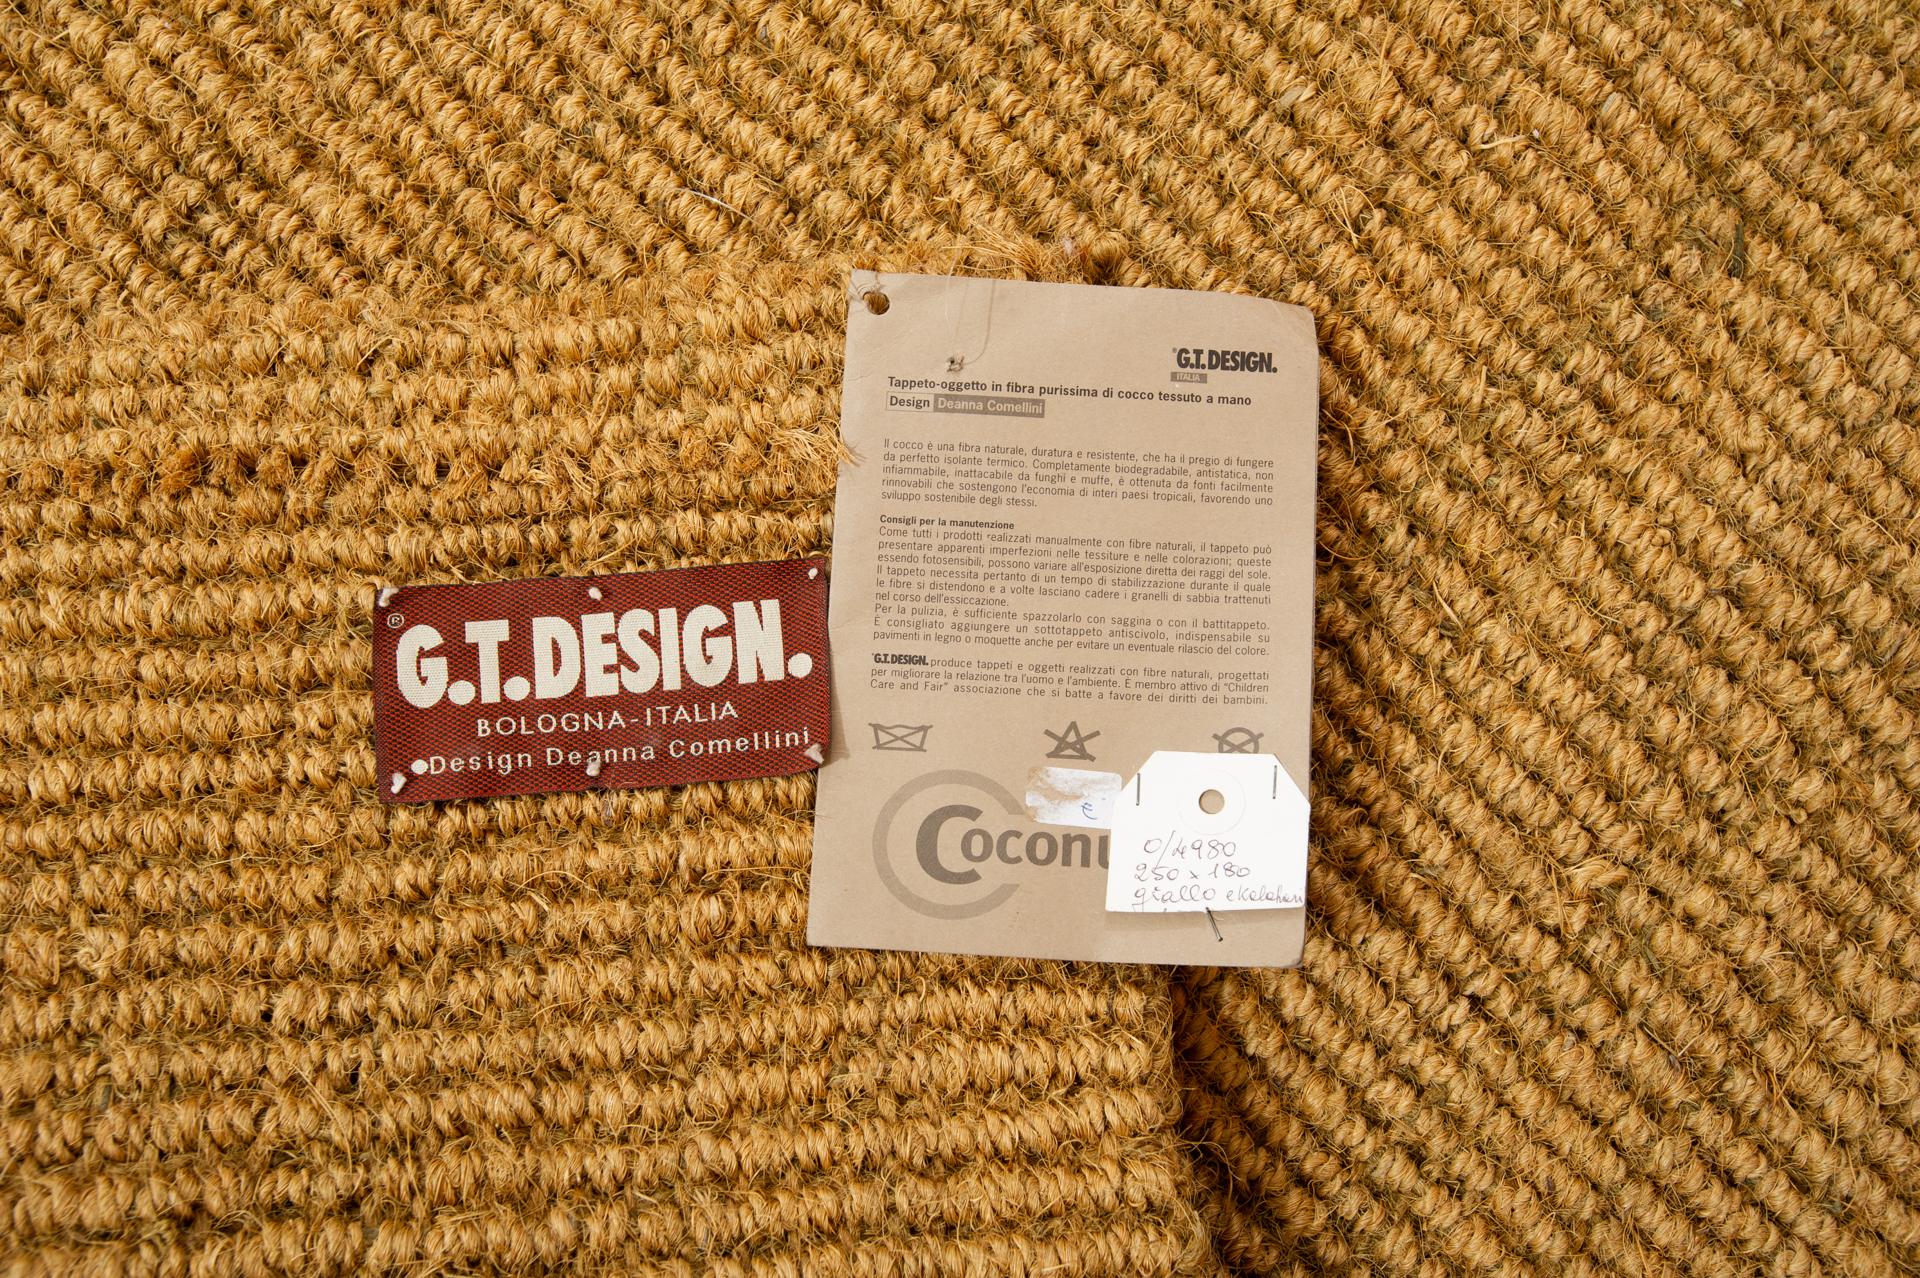 Hand-Woven Coconut Fiber Rugs For Sale